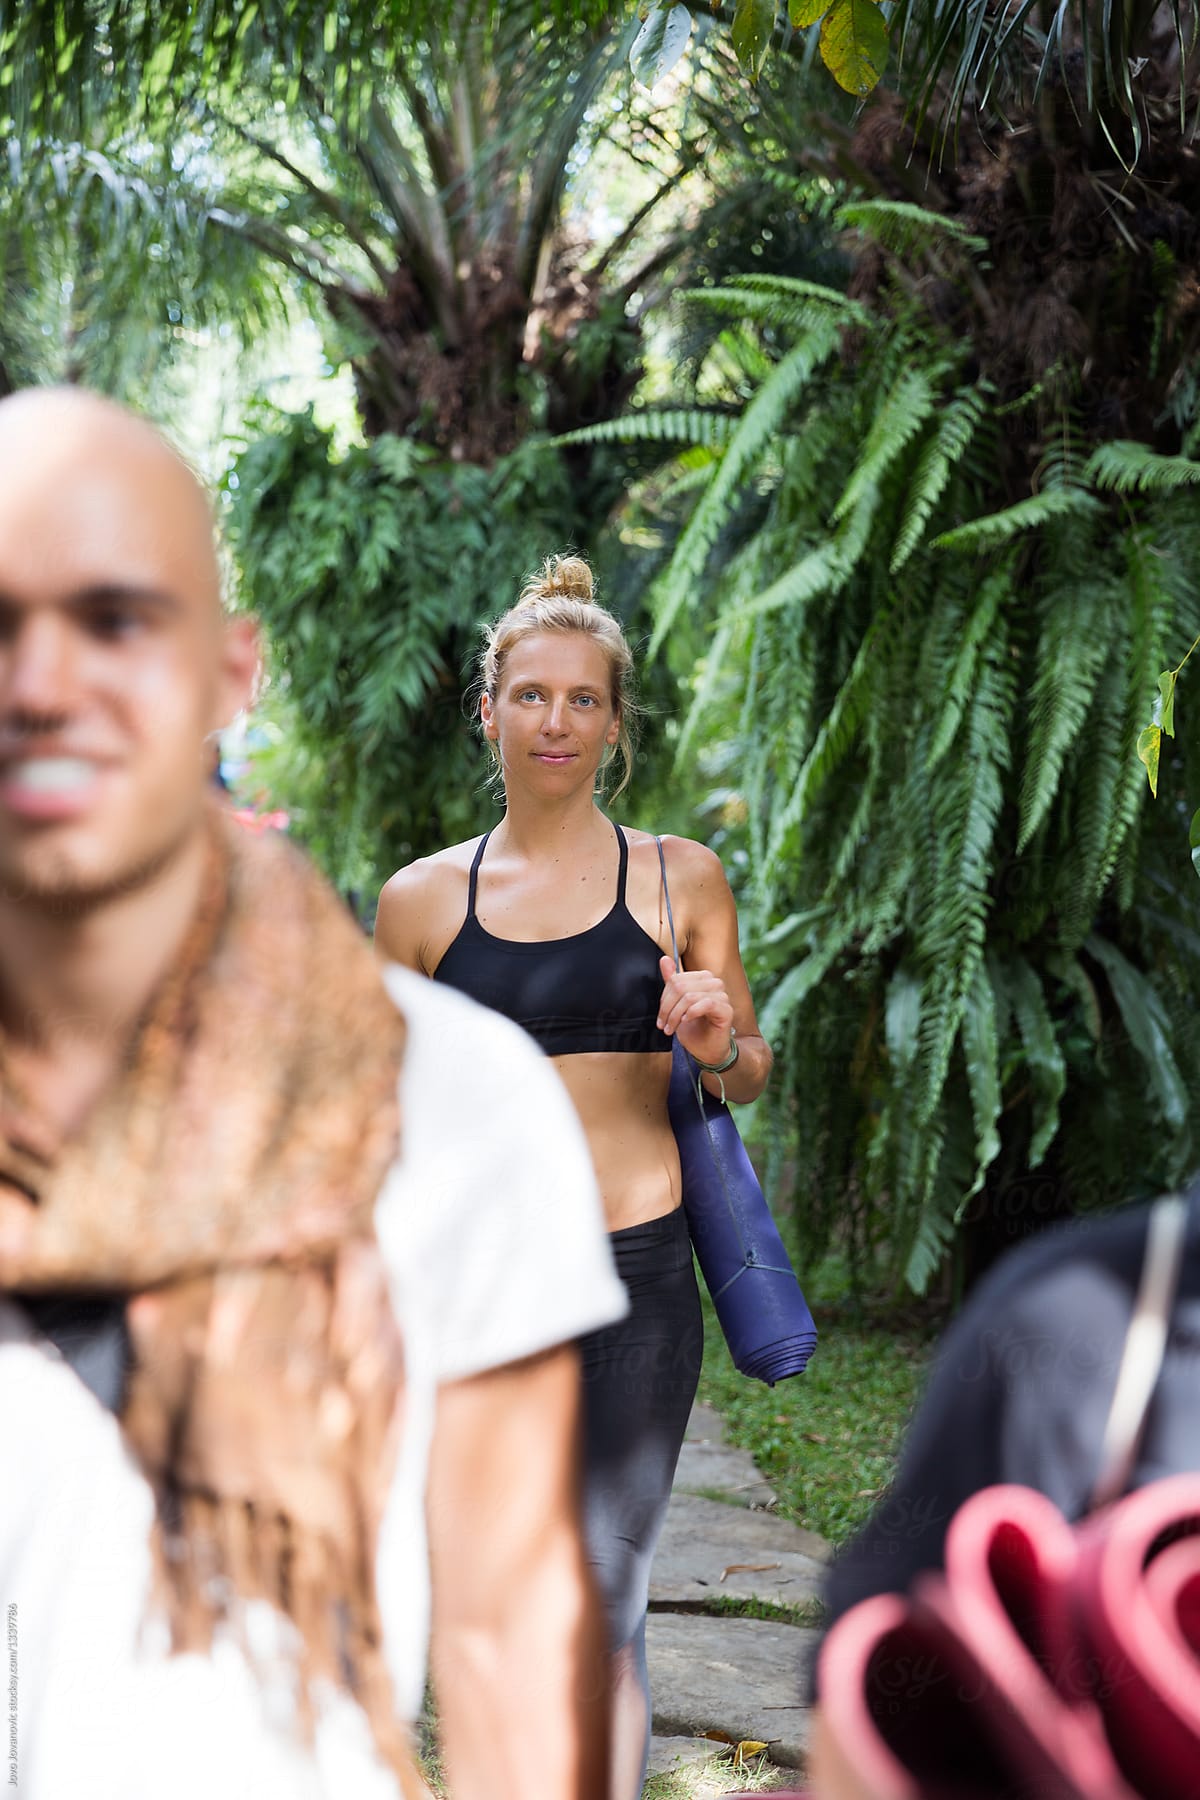 Two young people walking to a yoga practice